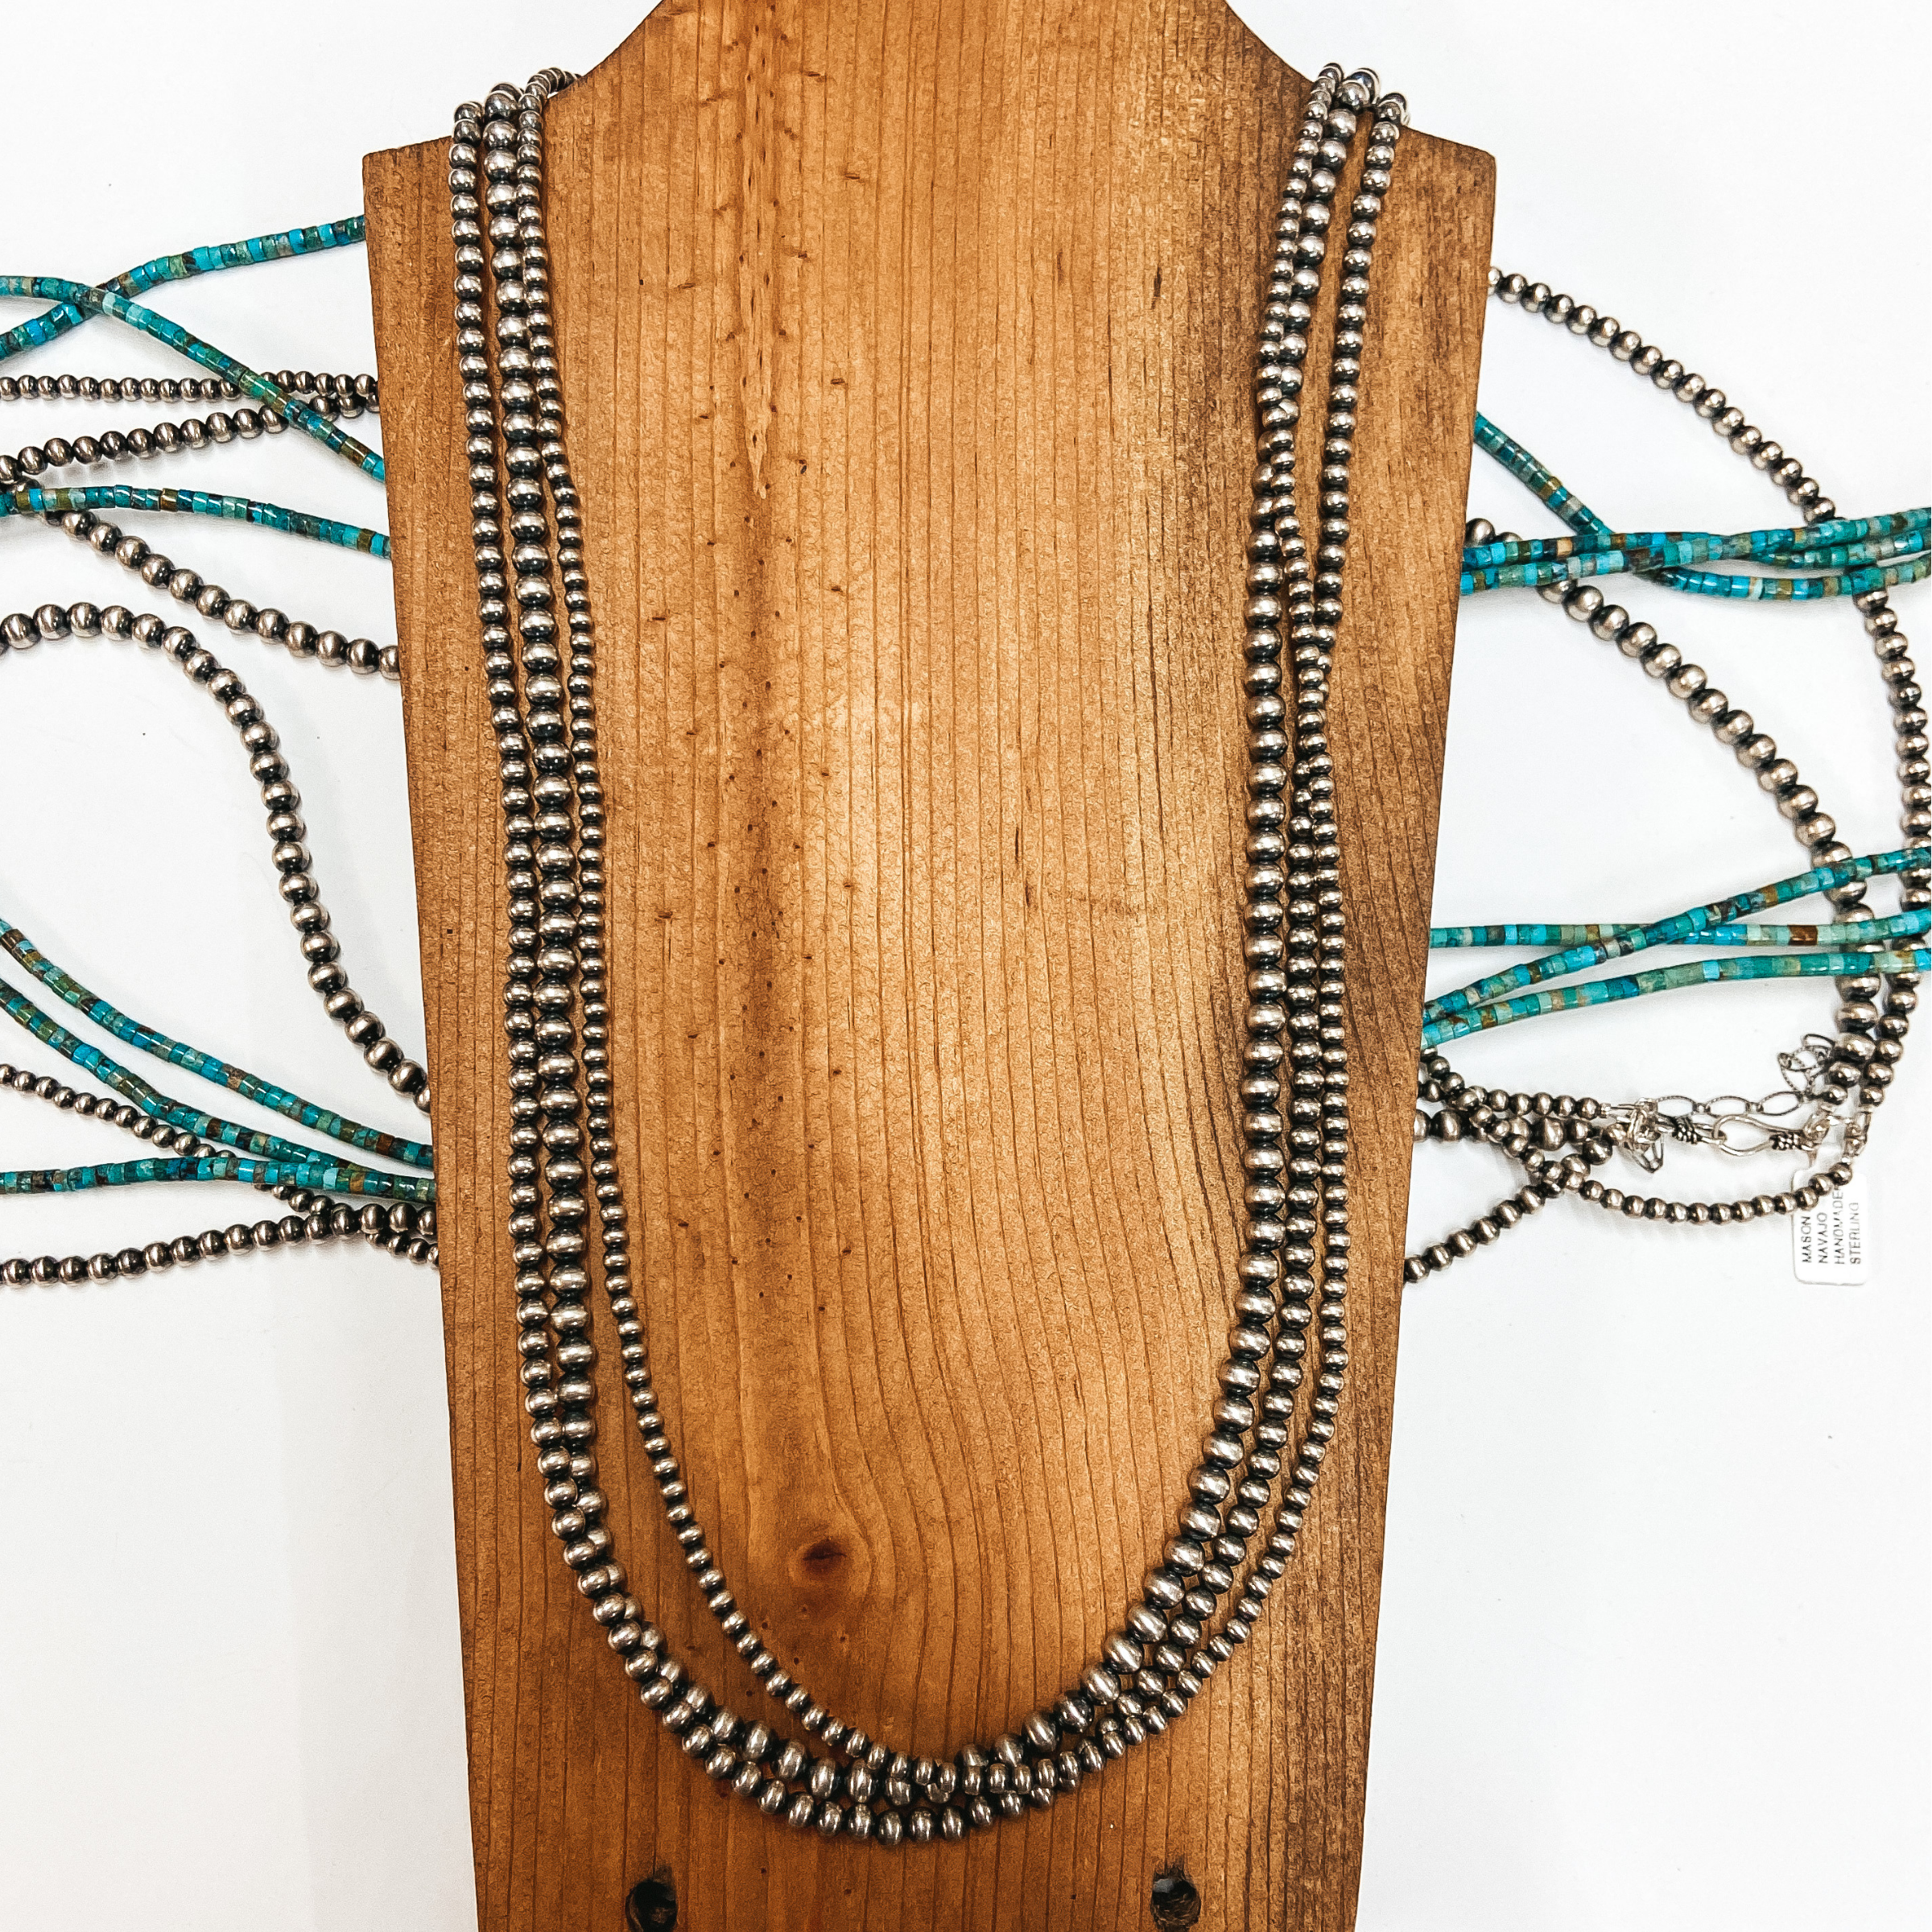 A set of three strands of sterling silver Navajo pearls. Pictured on wooden display with sterling silver and turquoise jewelry.